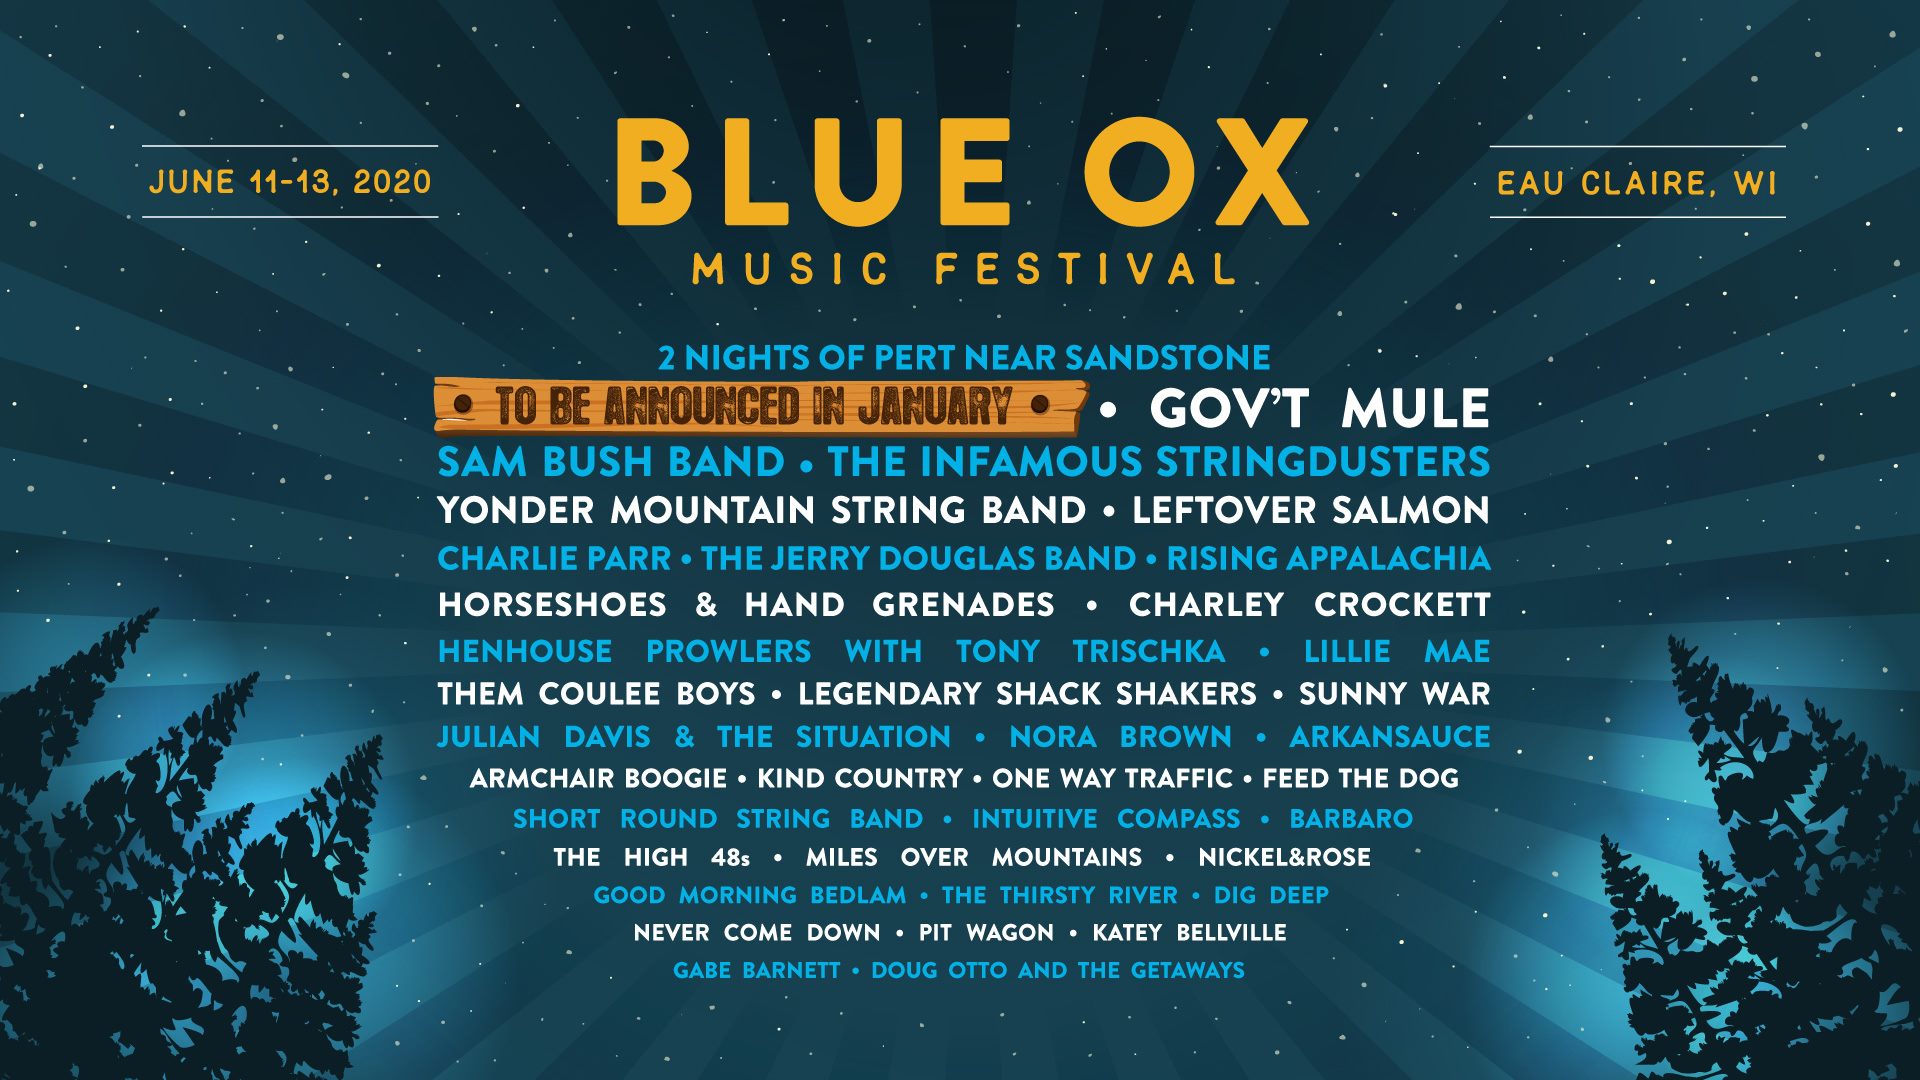 Blue Ox Music Festival First Round Lineup Gov’t Mule, The Infamous